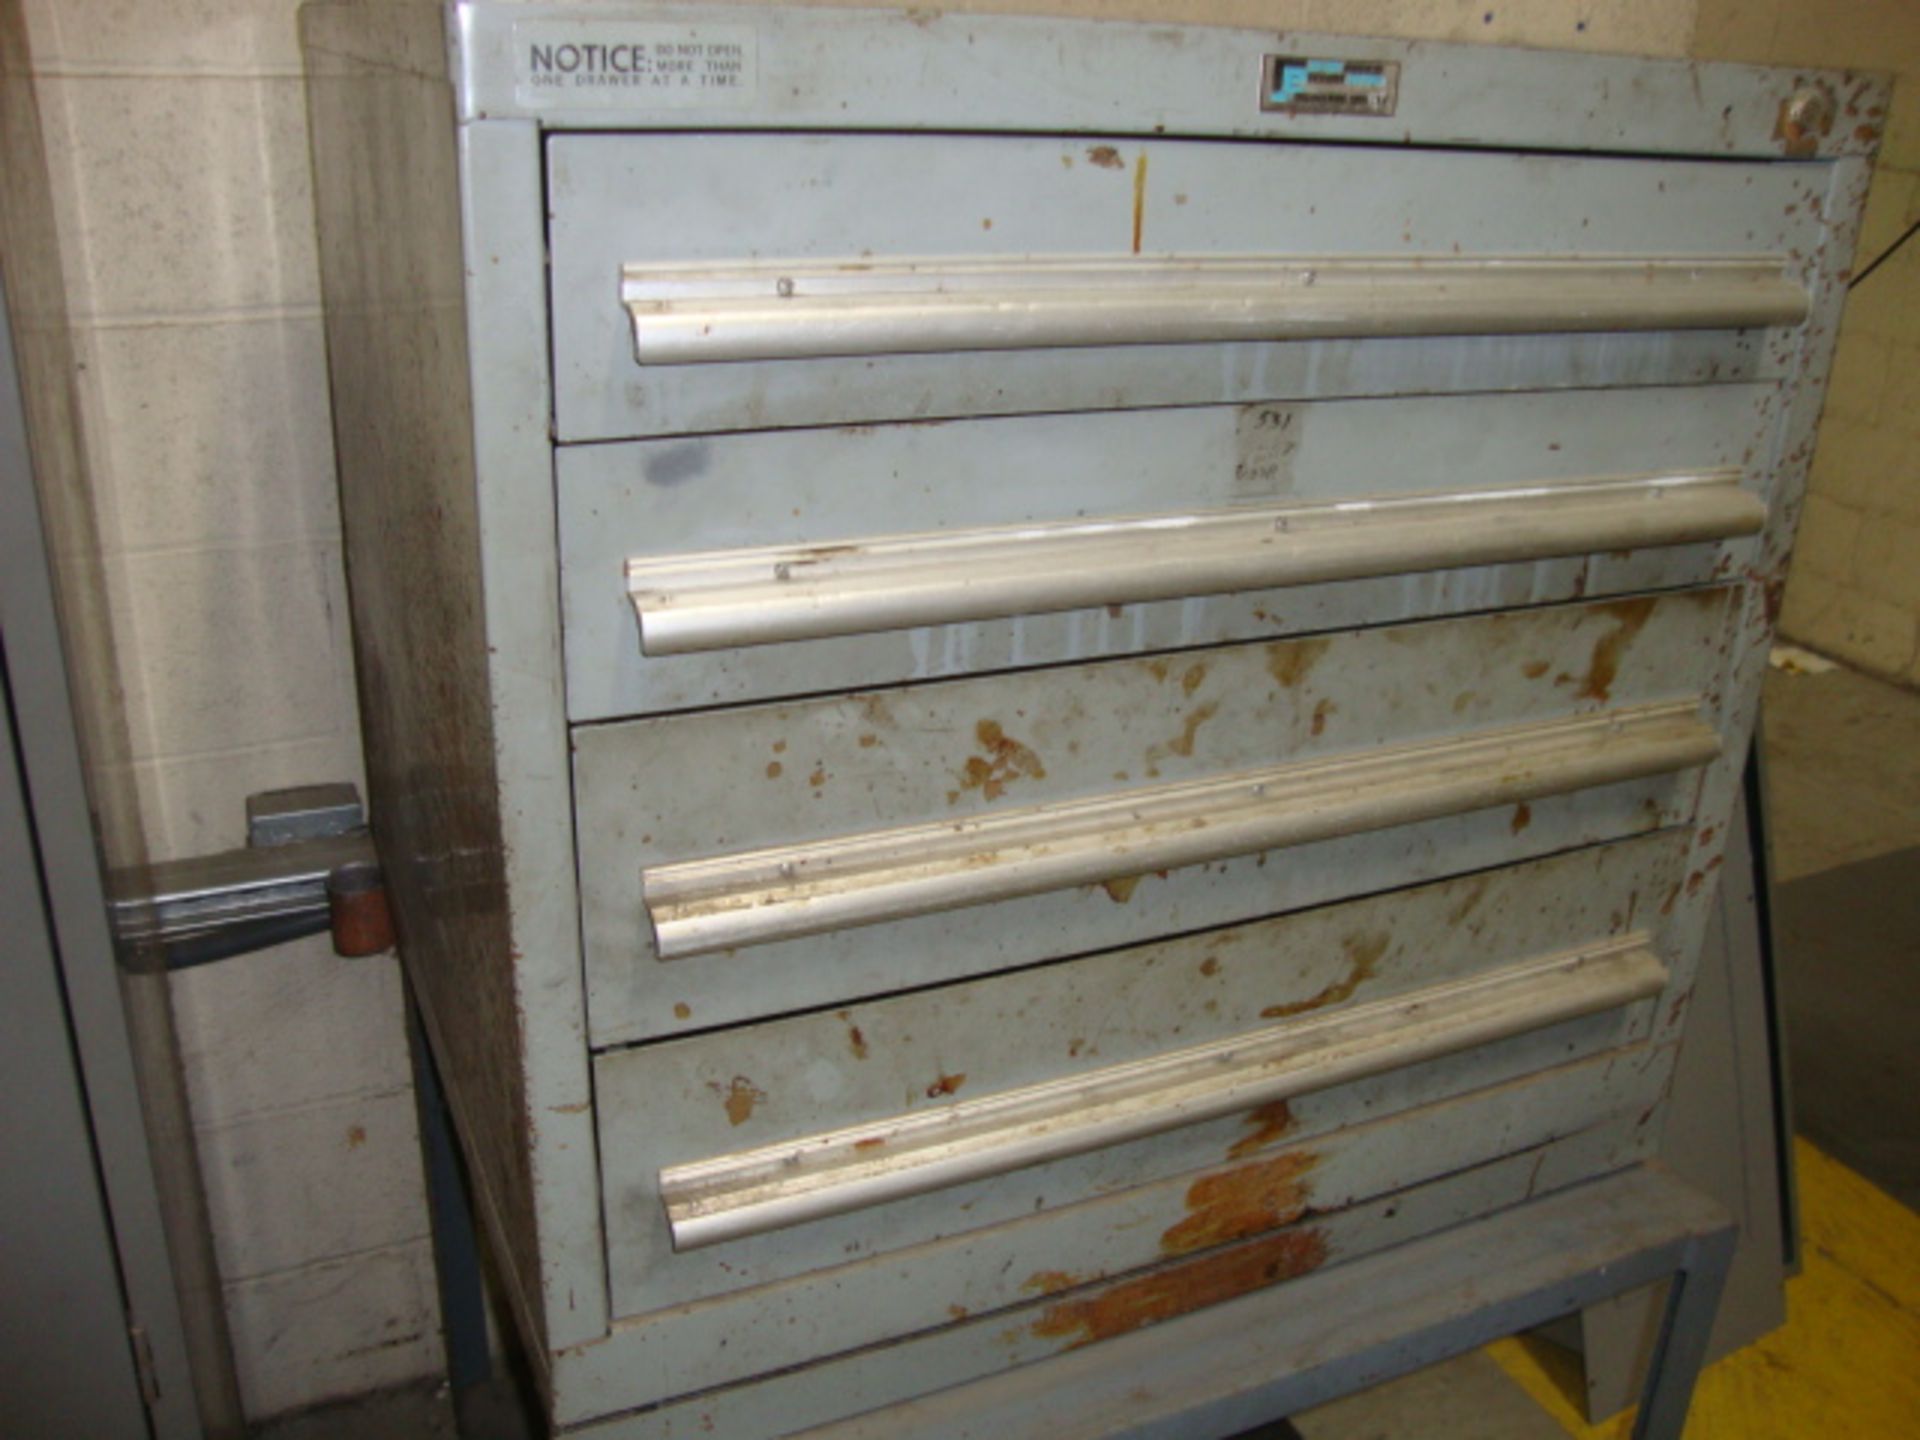 Rack Engineering Tool Cabinet, approx. 30" x 28" x 29" tall